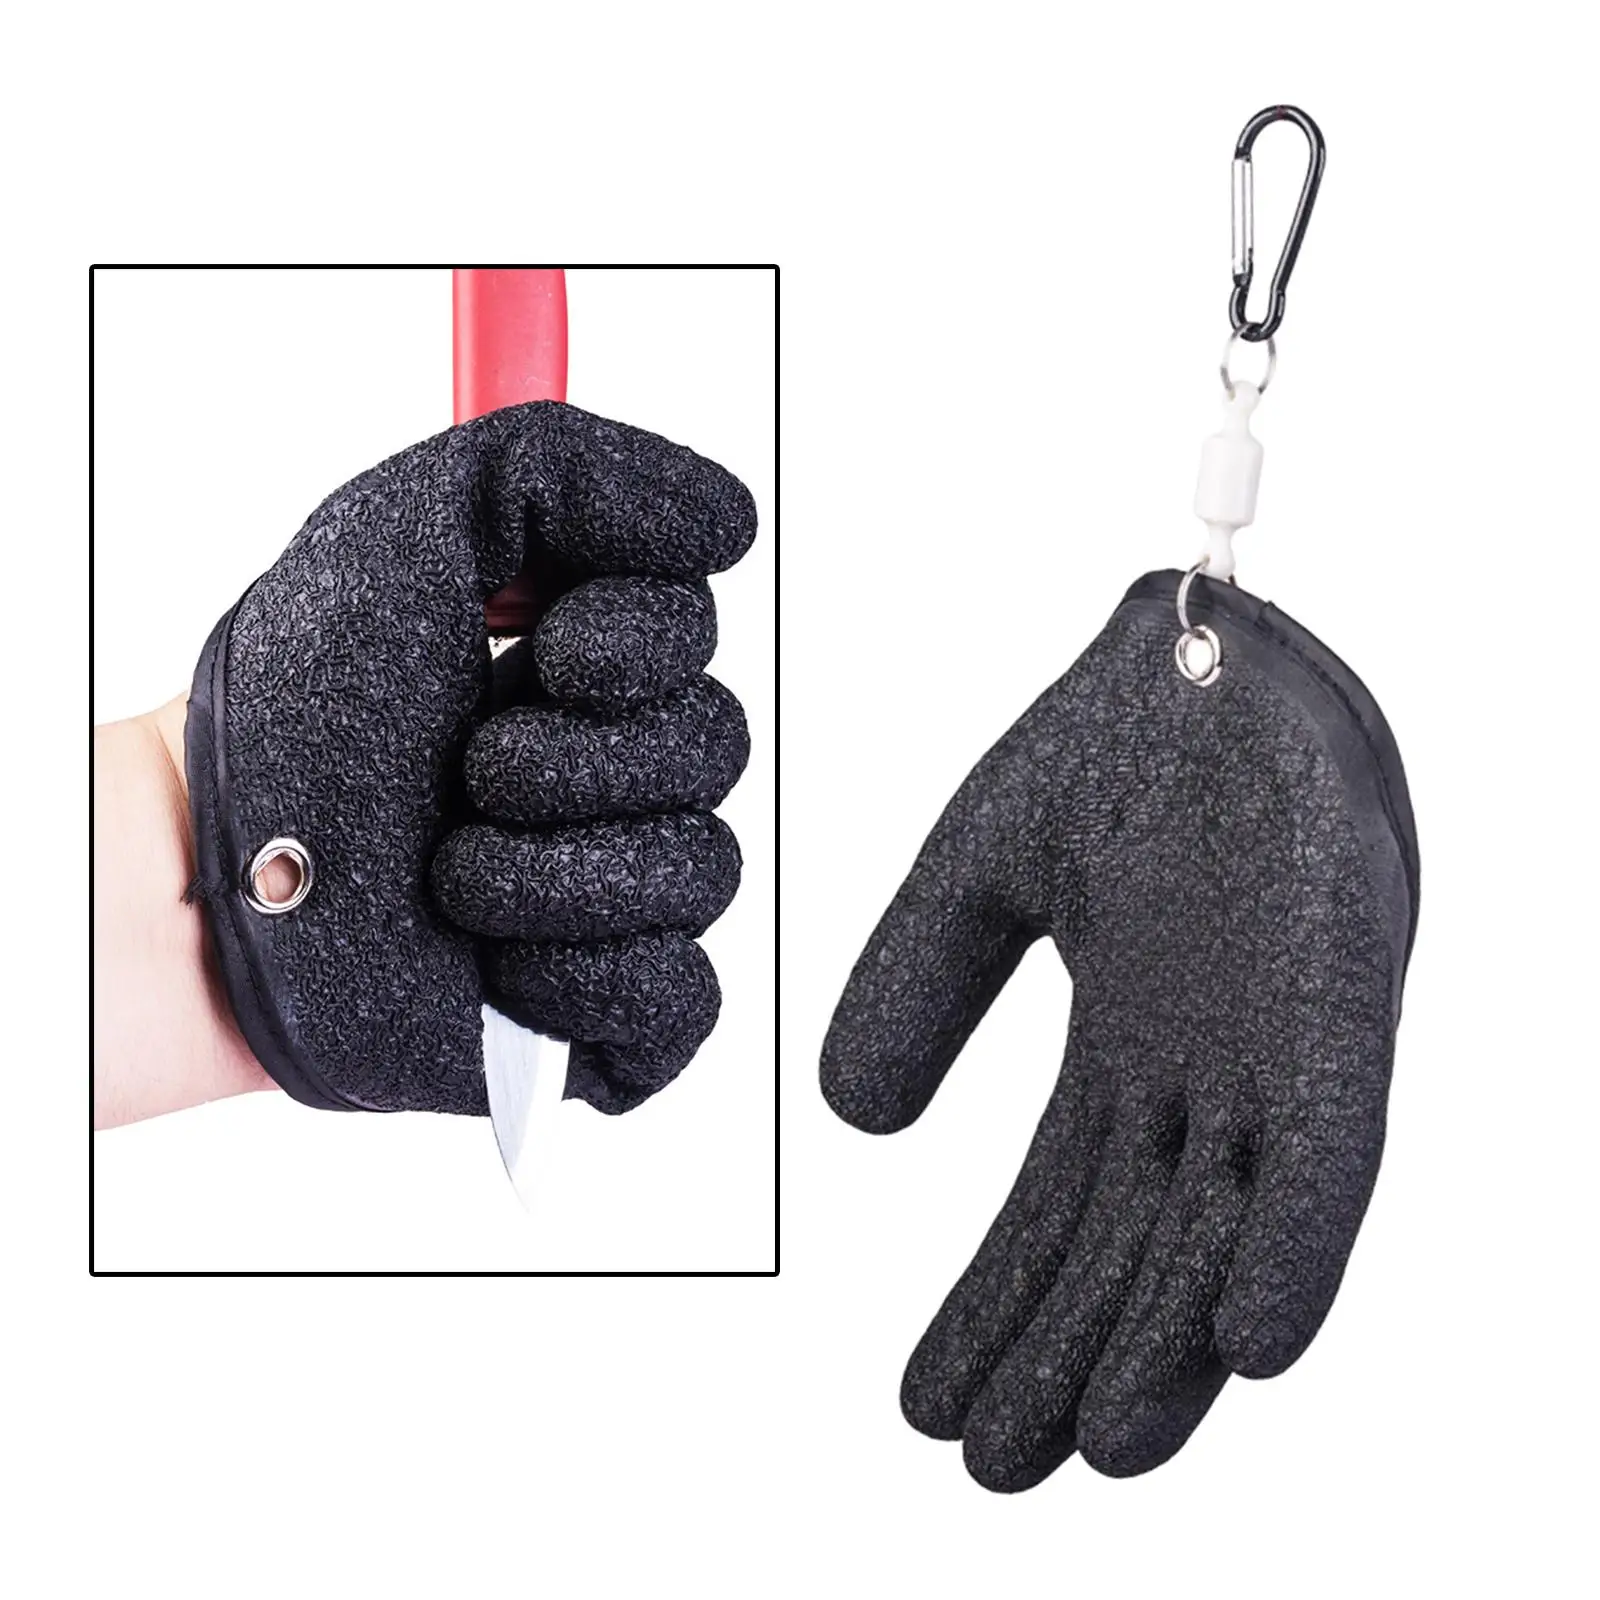 Fishing Puncture Proof Gloves w/Magnet Release Waterproof Fish Hunting Glove